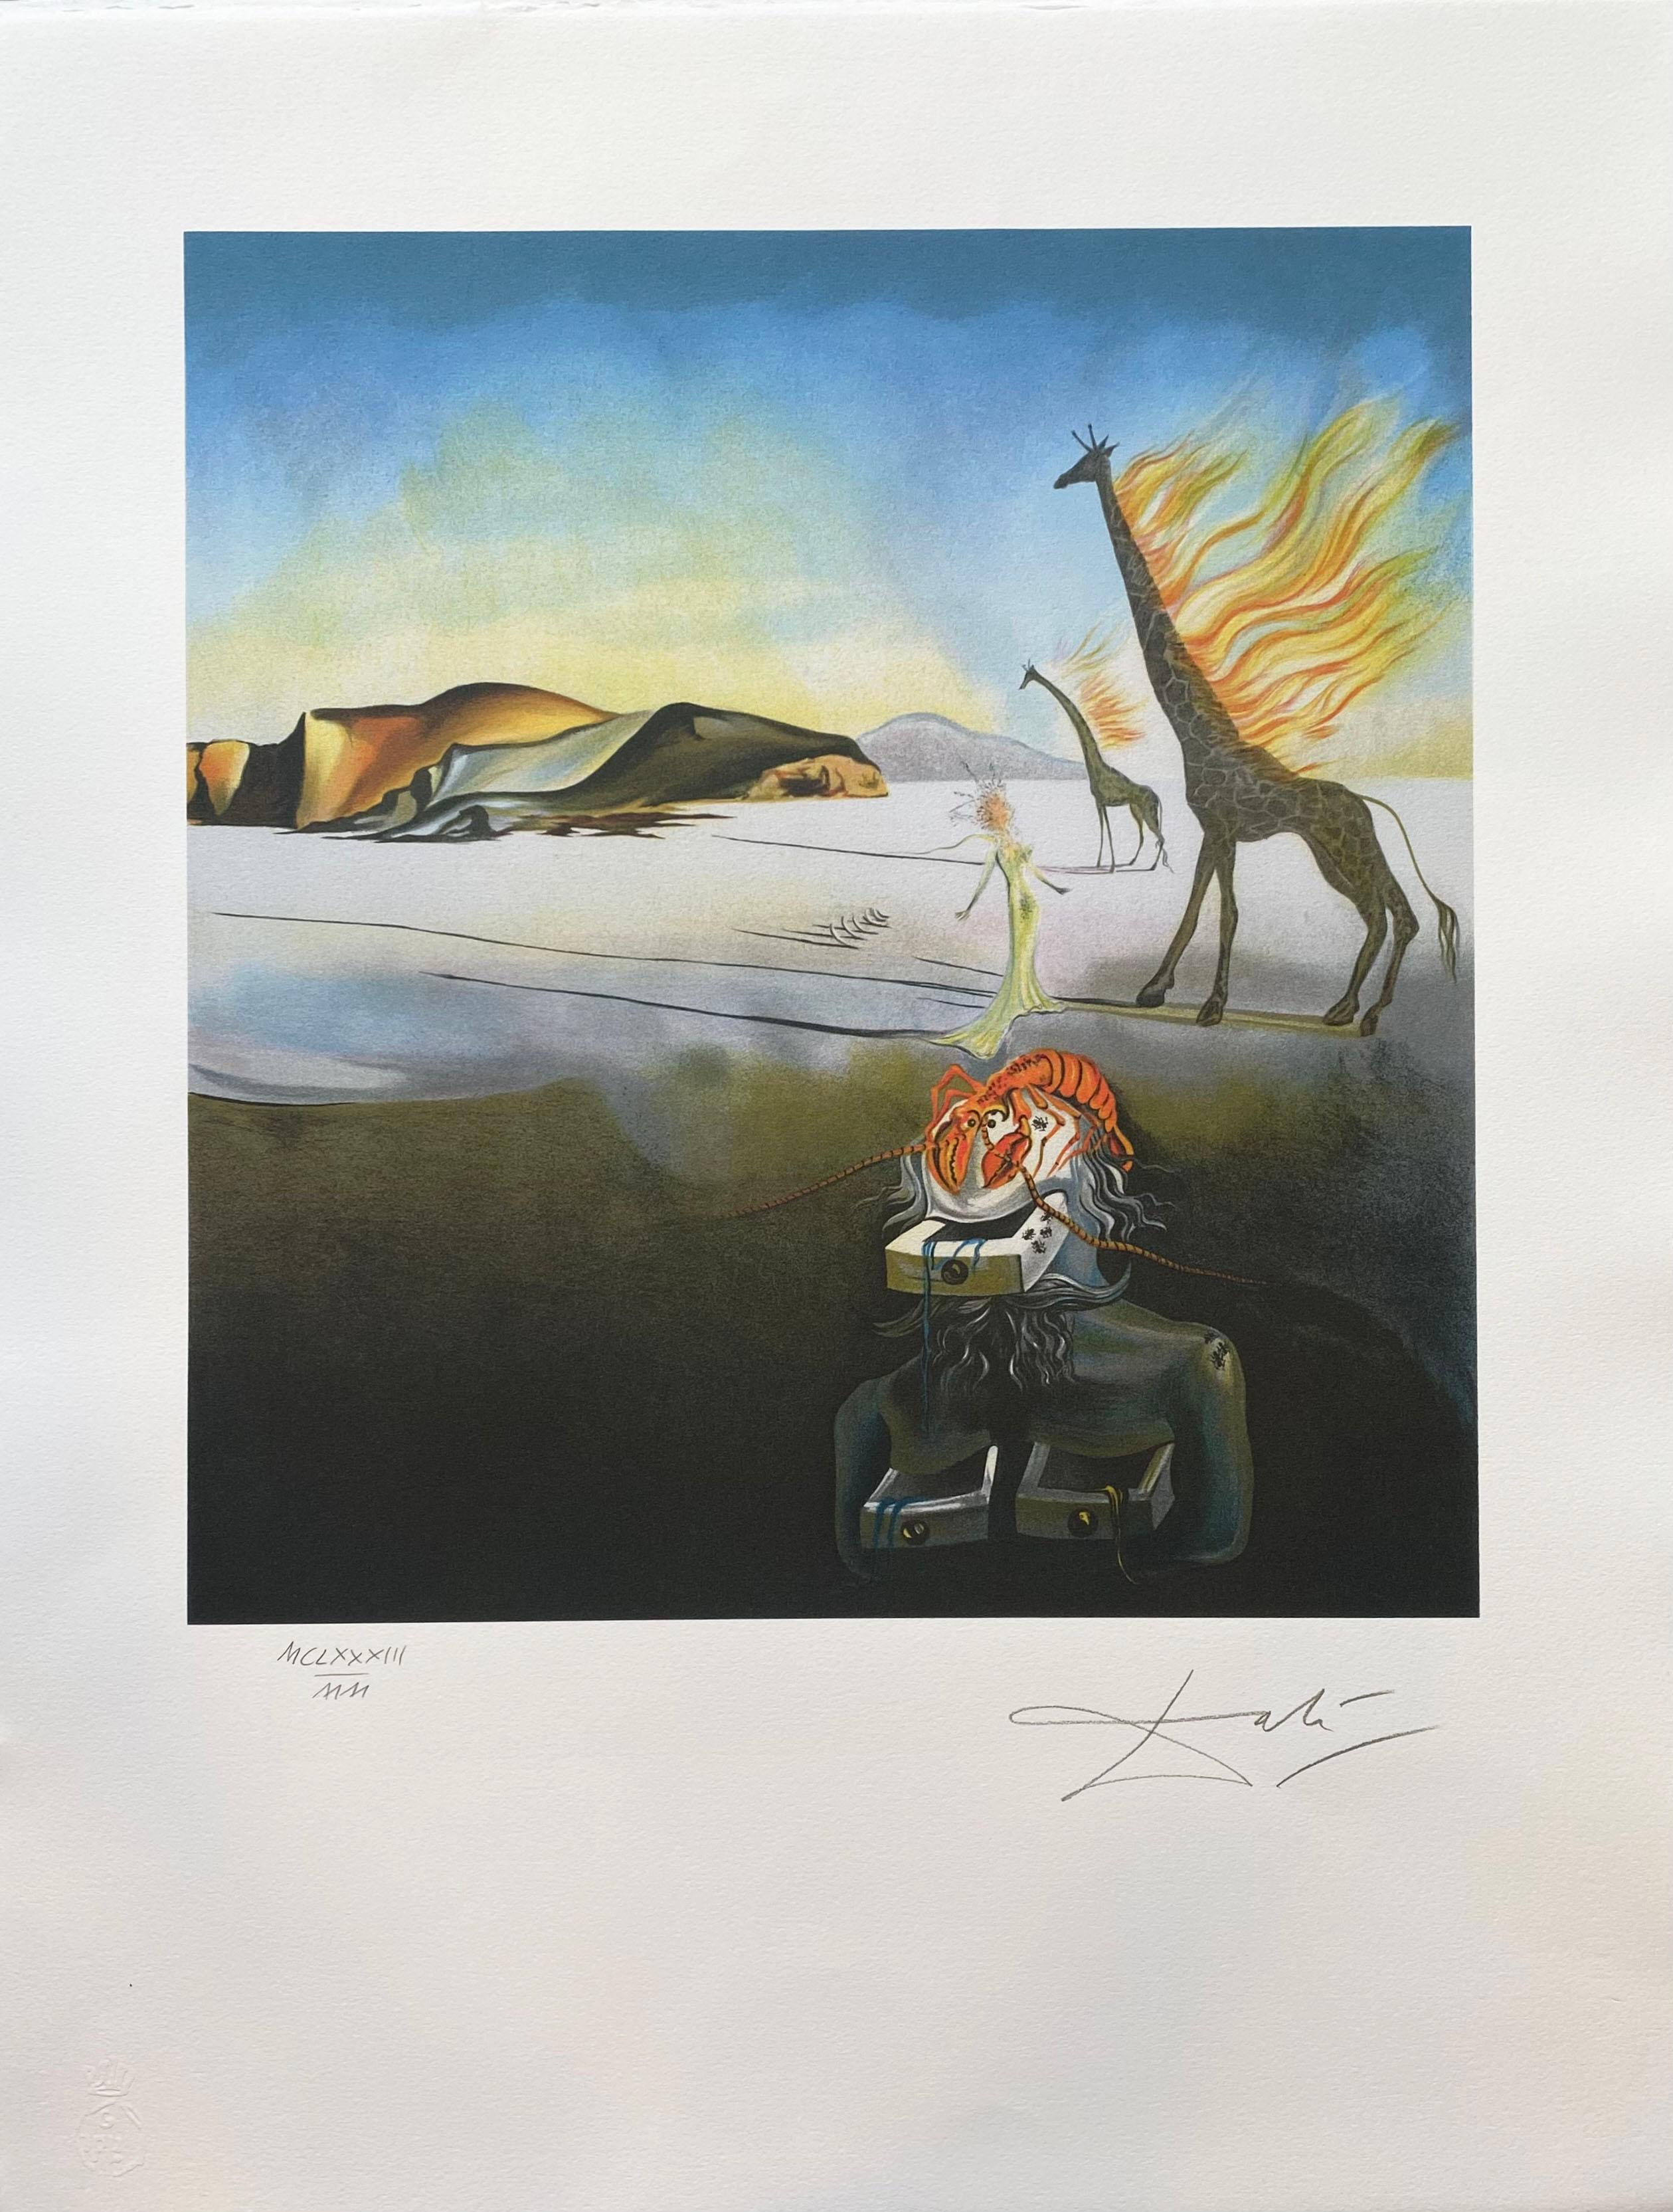 Salvador Dali - The Flaming Giraffe.
Lithograph 
Signed in the plate and numbered 
Numbered on 2000 (MCLXXXIII) 
Size : 50x66cm
390€